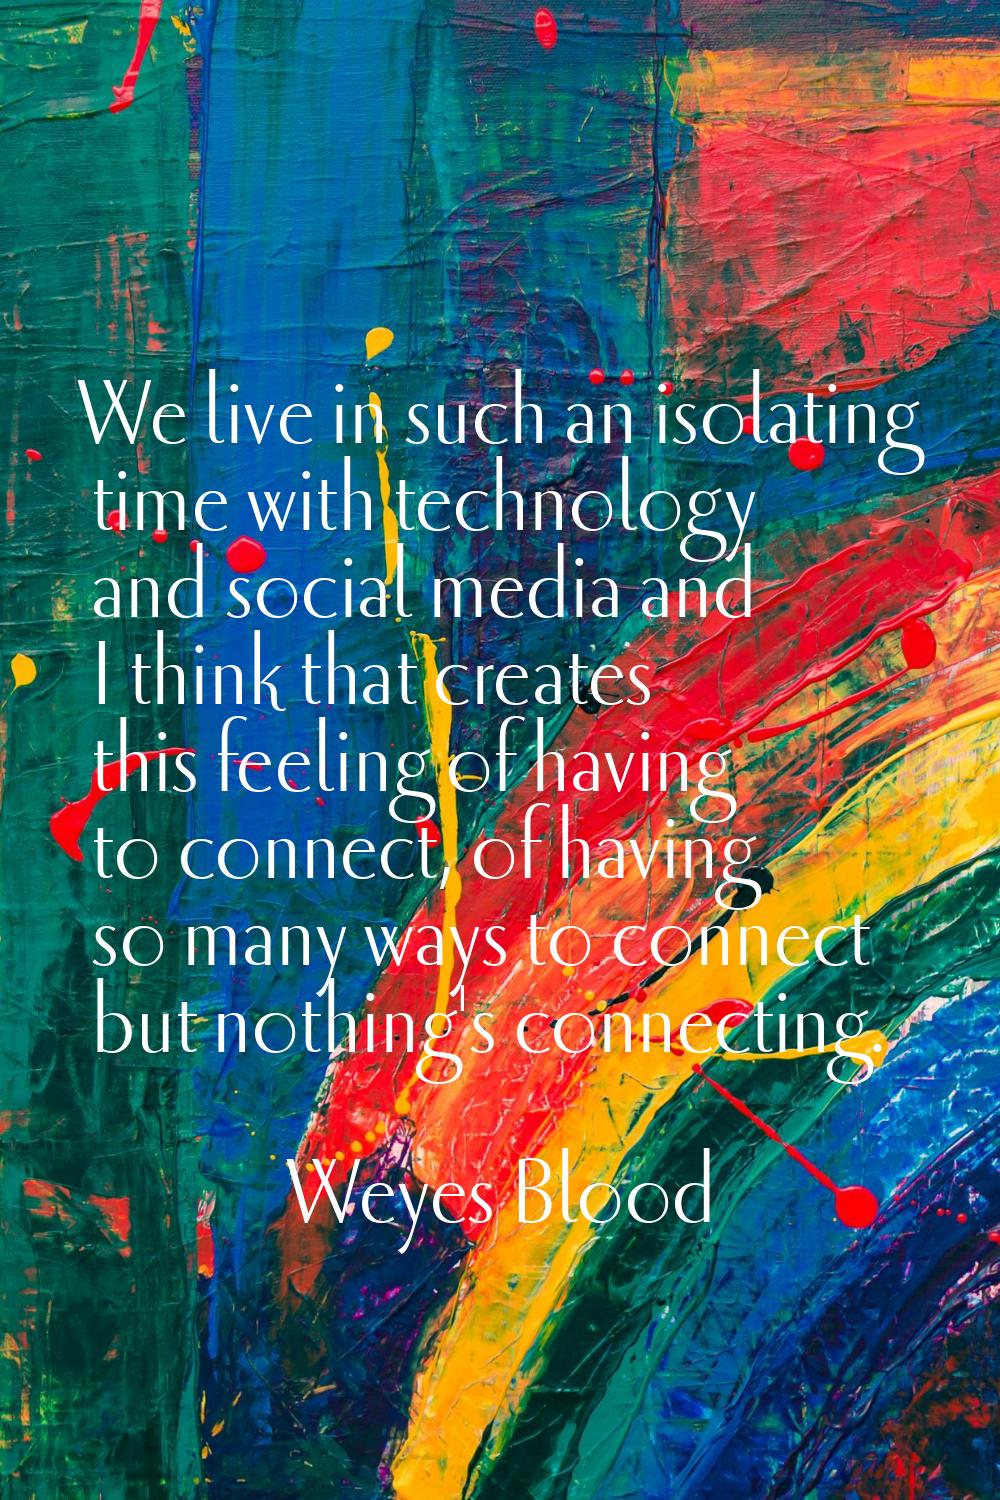 We live in such an isolating time with technology and social media and I think that creates this fe